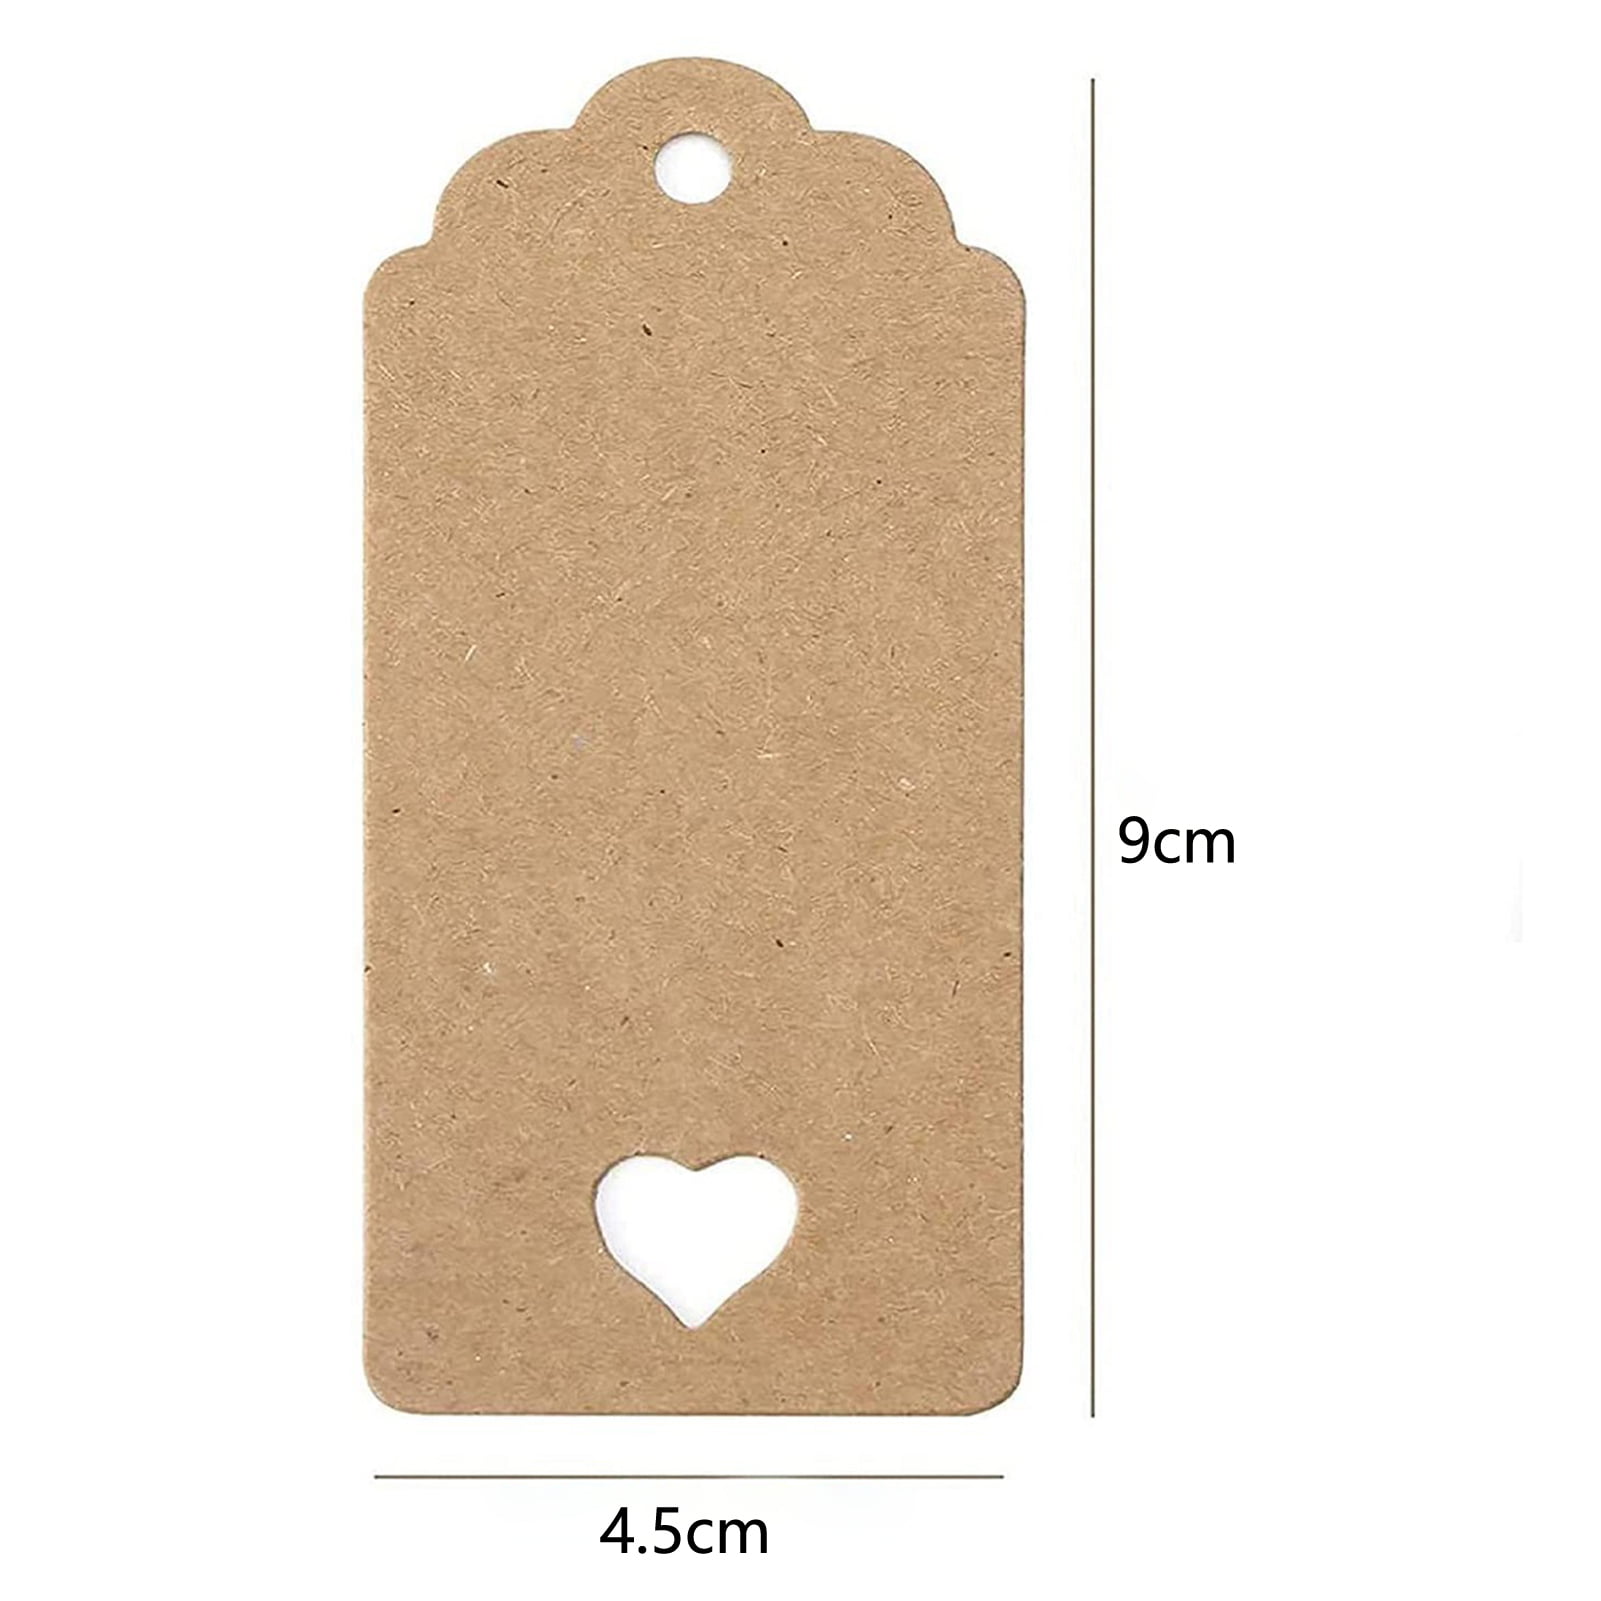 Blank Kraft Paper Gift The Tag 5x3cm 2x4cm Craft The Tag Hang For Packaging  THANK YOU Price The Tags Wedding Party Decoration From Sjnp05, $3.26